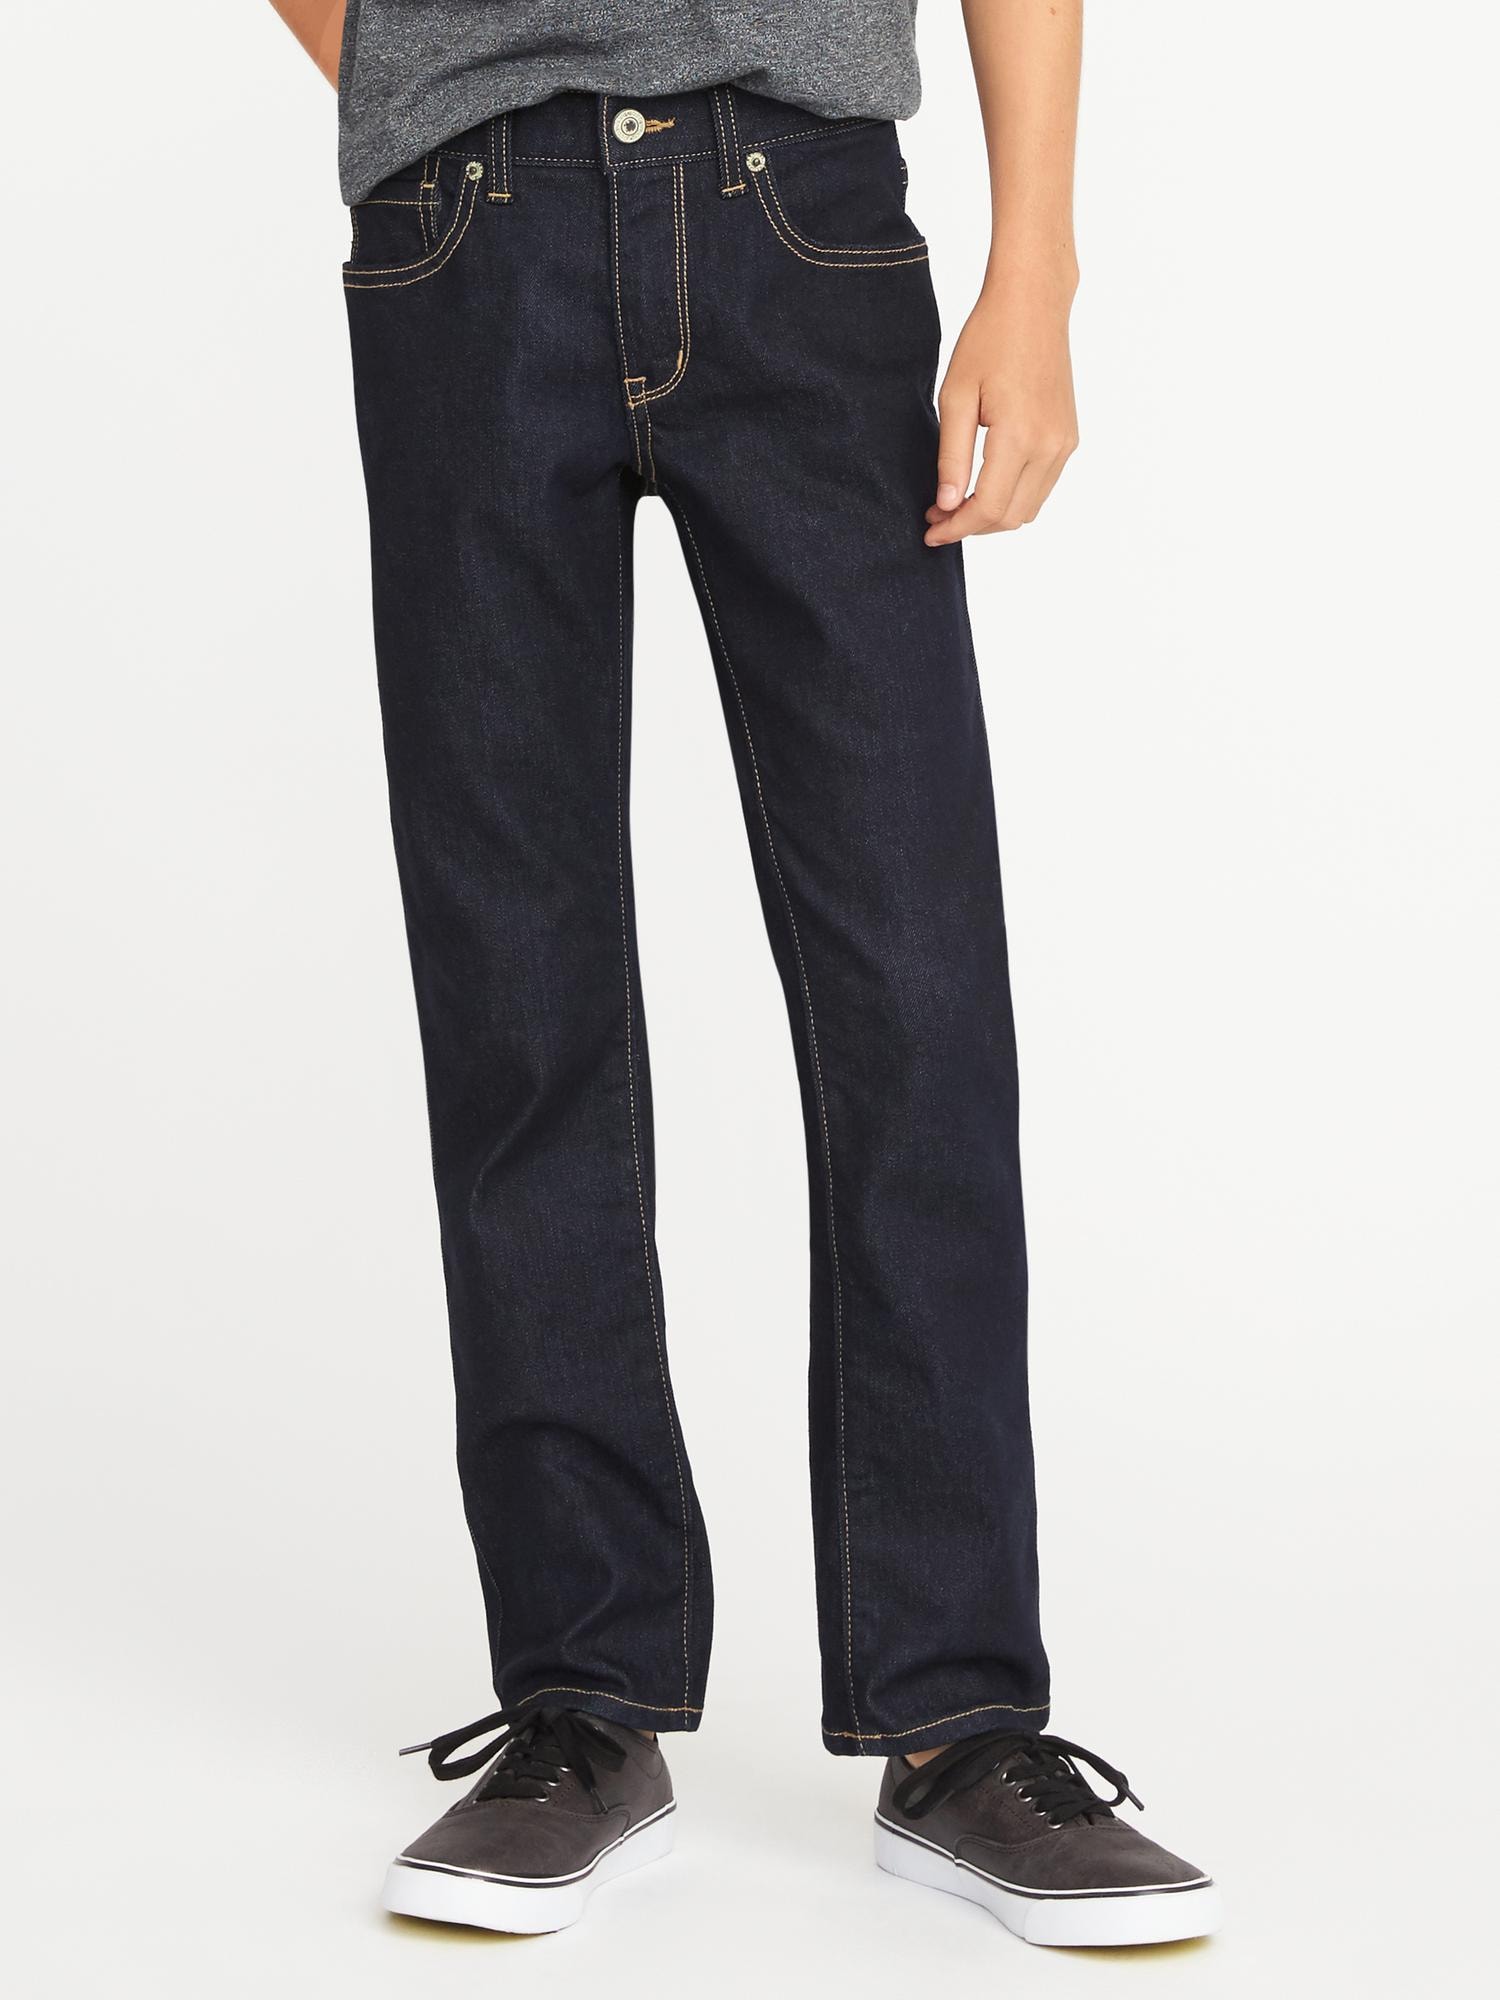 Athletic Built-In Flex Jeans for Boys | Old Navy